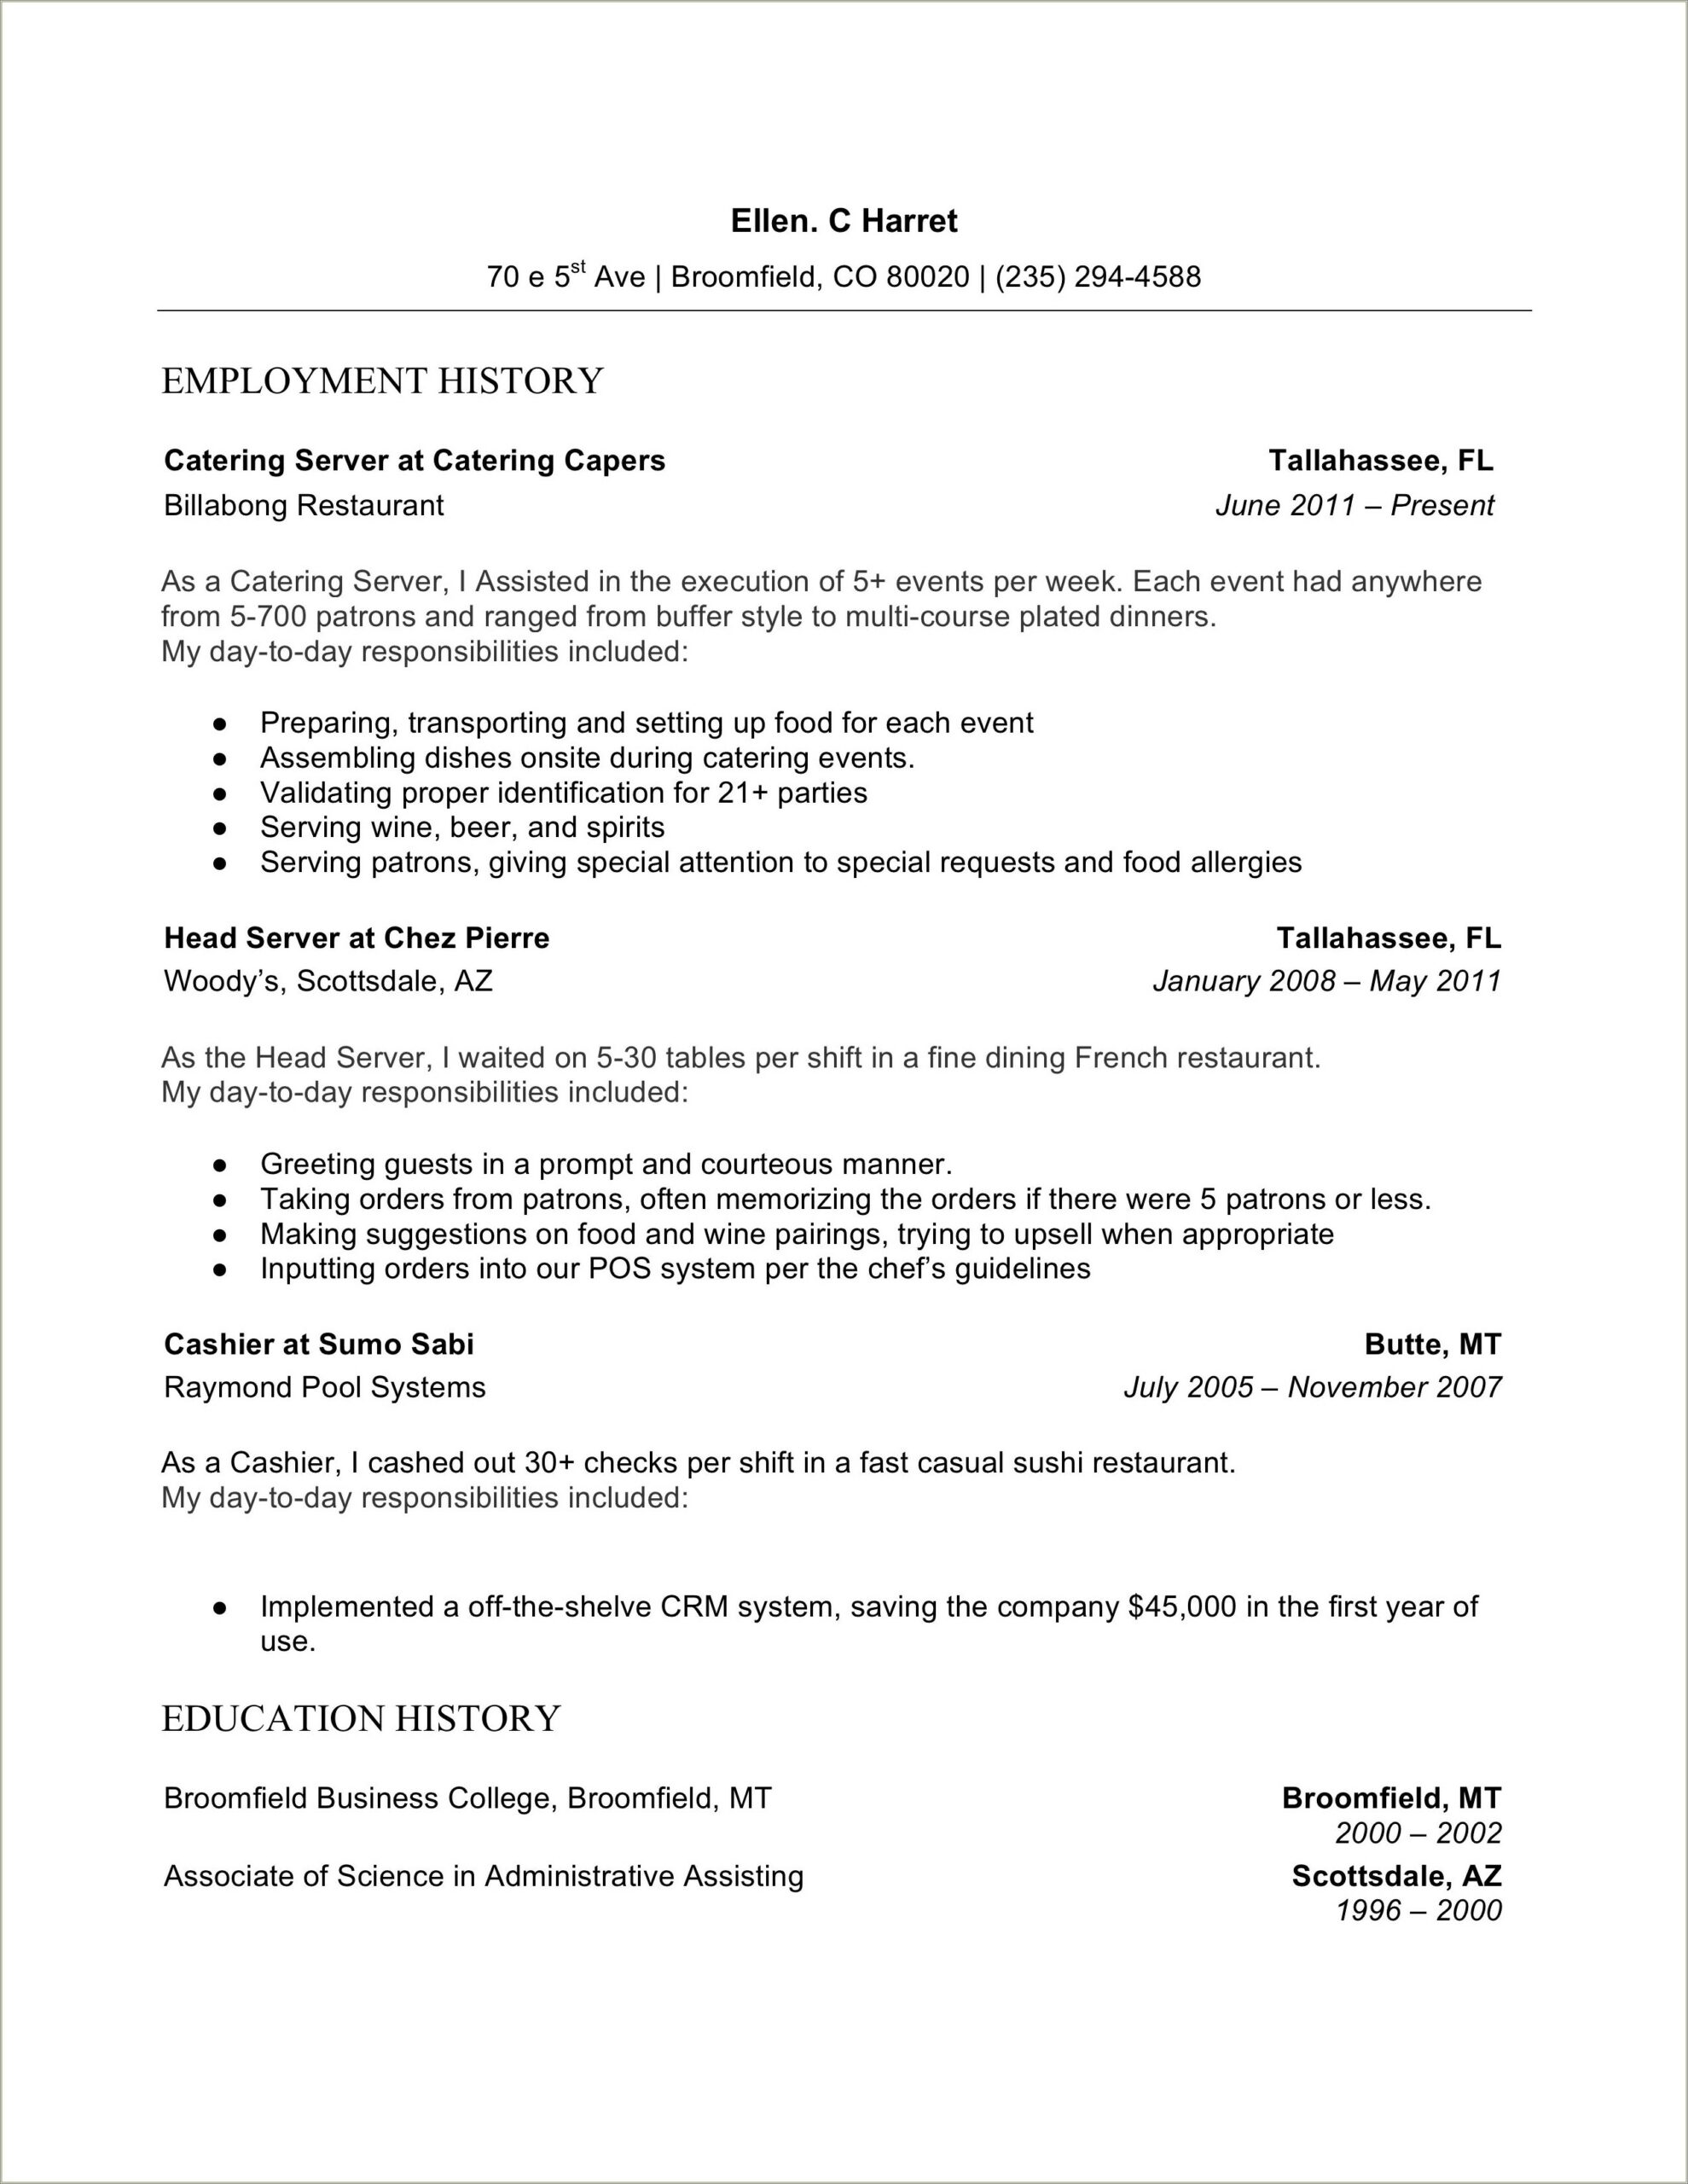 Background For The Header In Resume Word